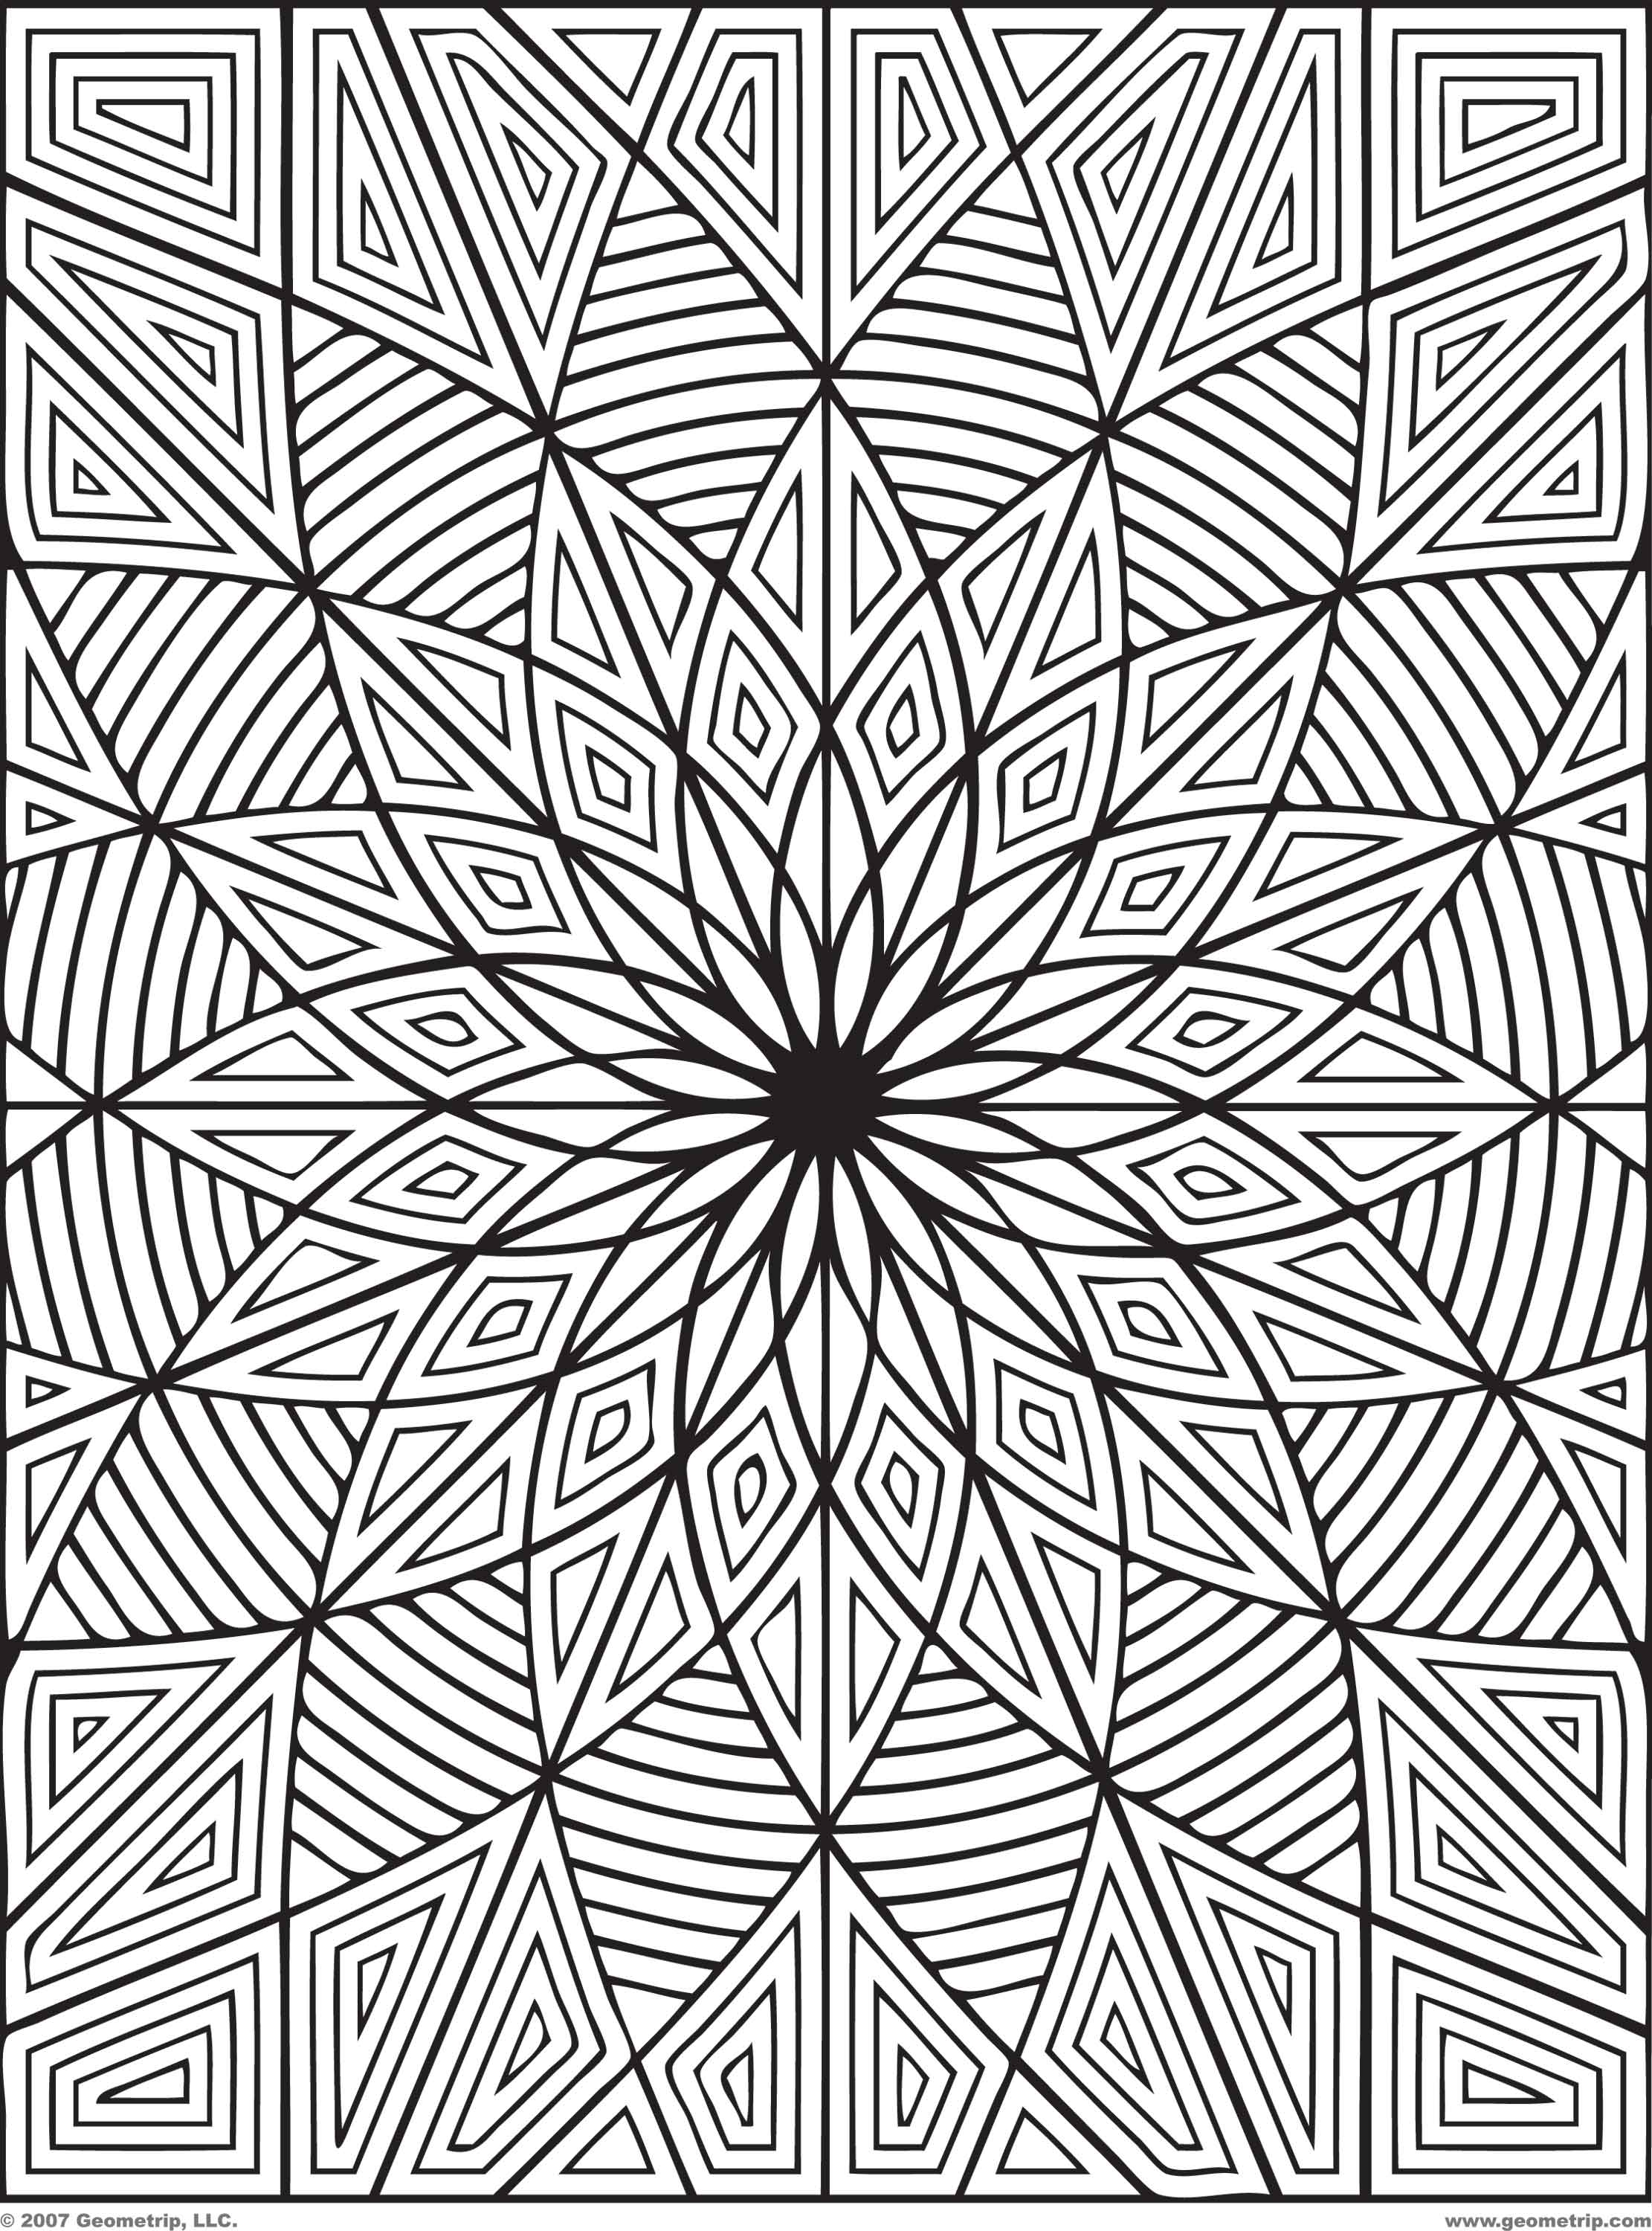 16 Cool Coloring Pages Of Designs Images - Cool Geometric Designs